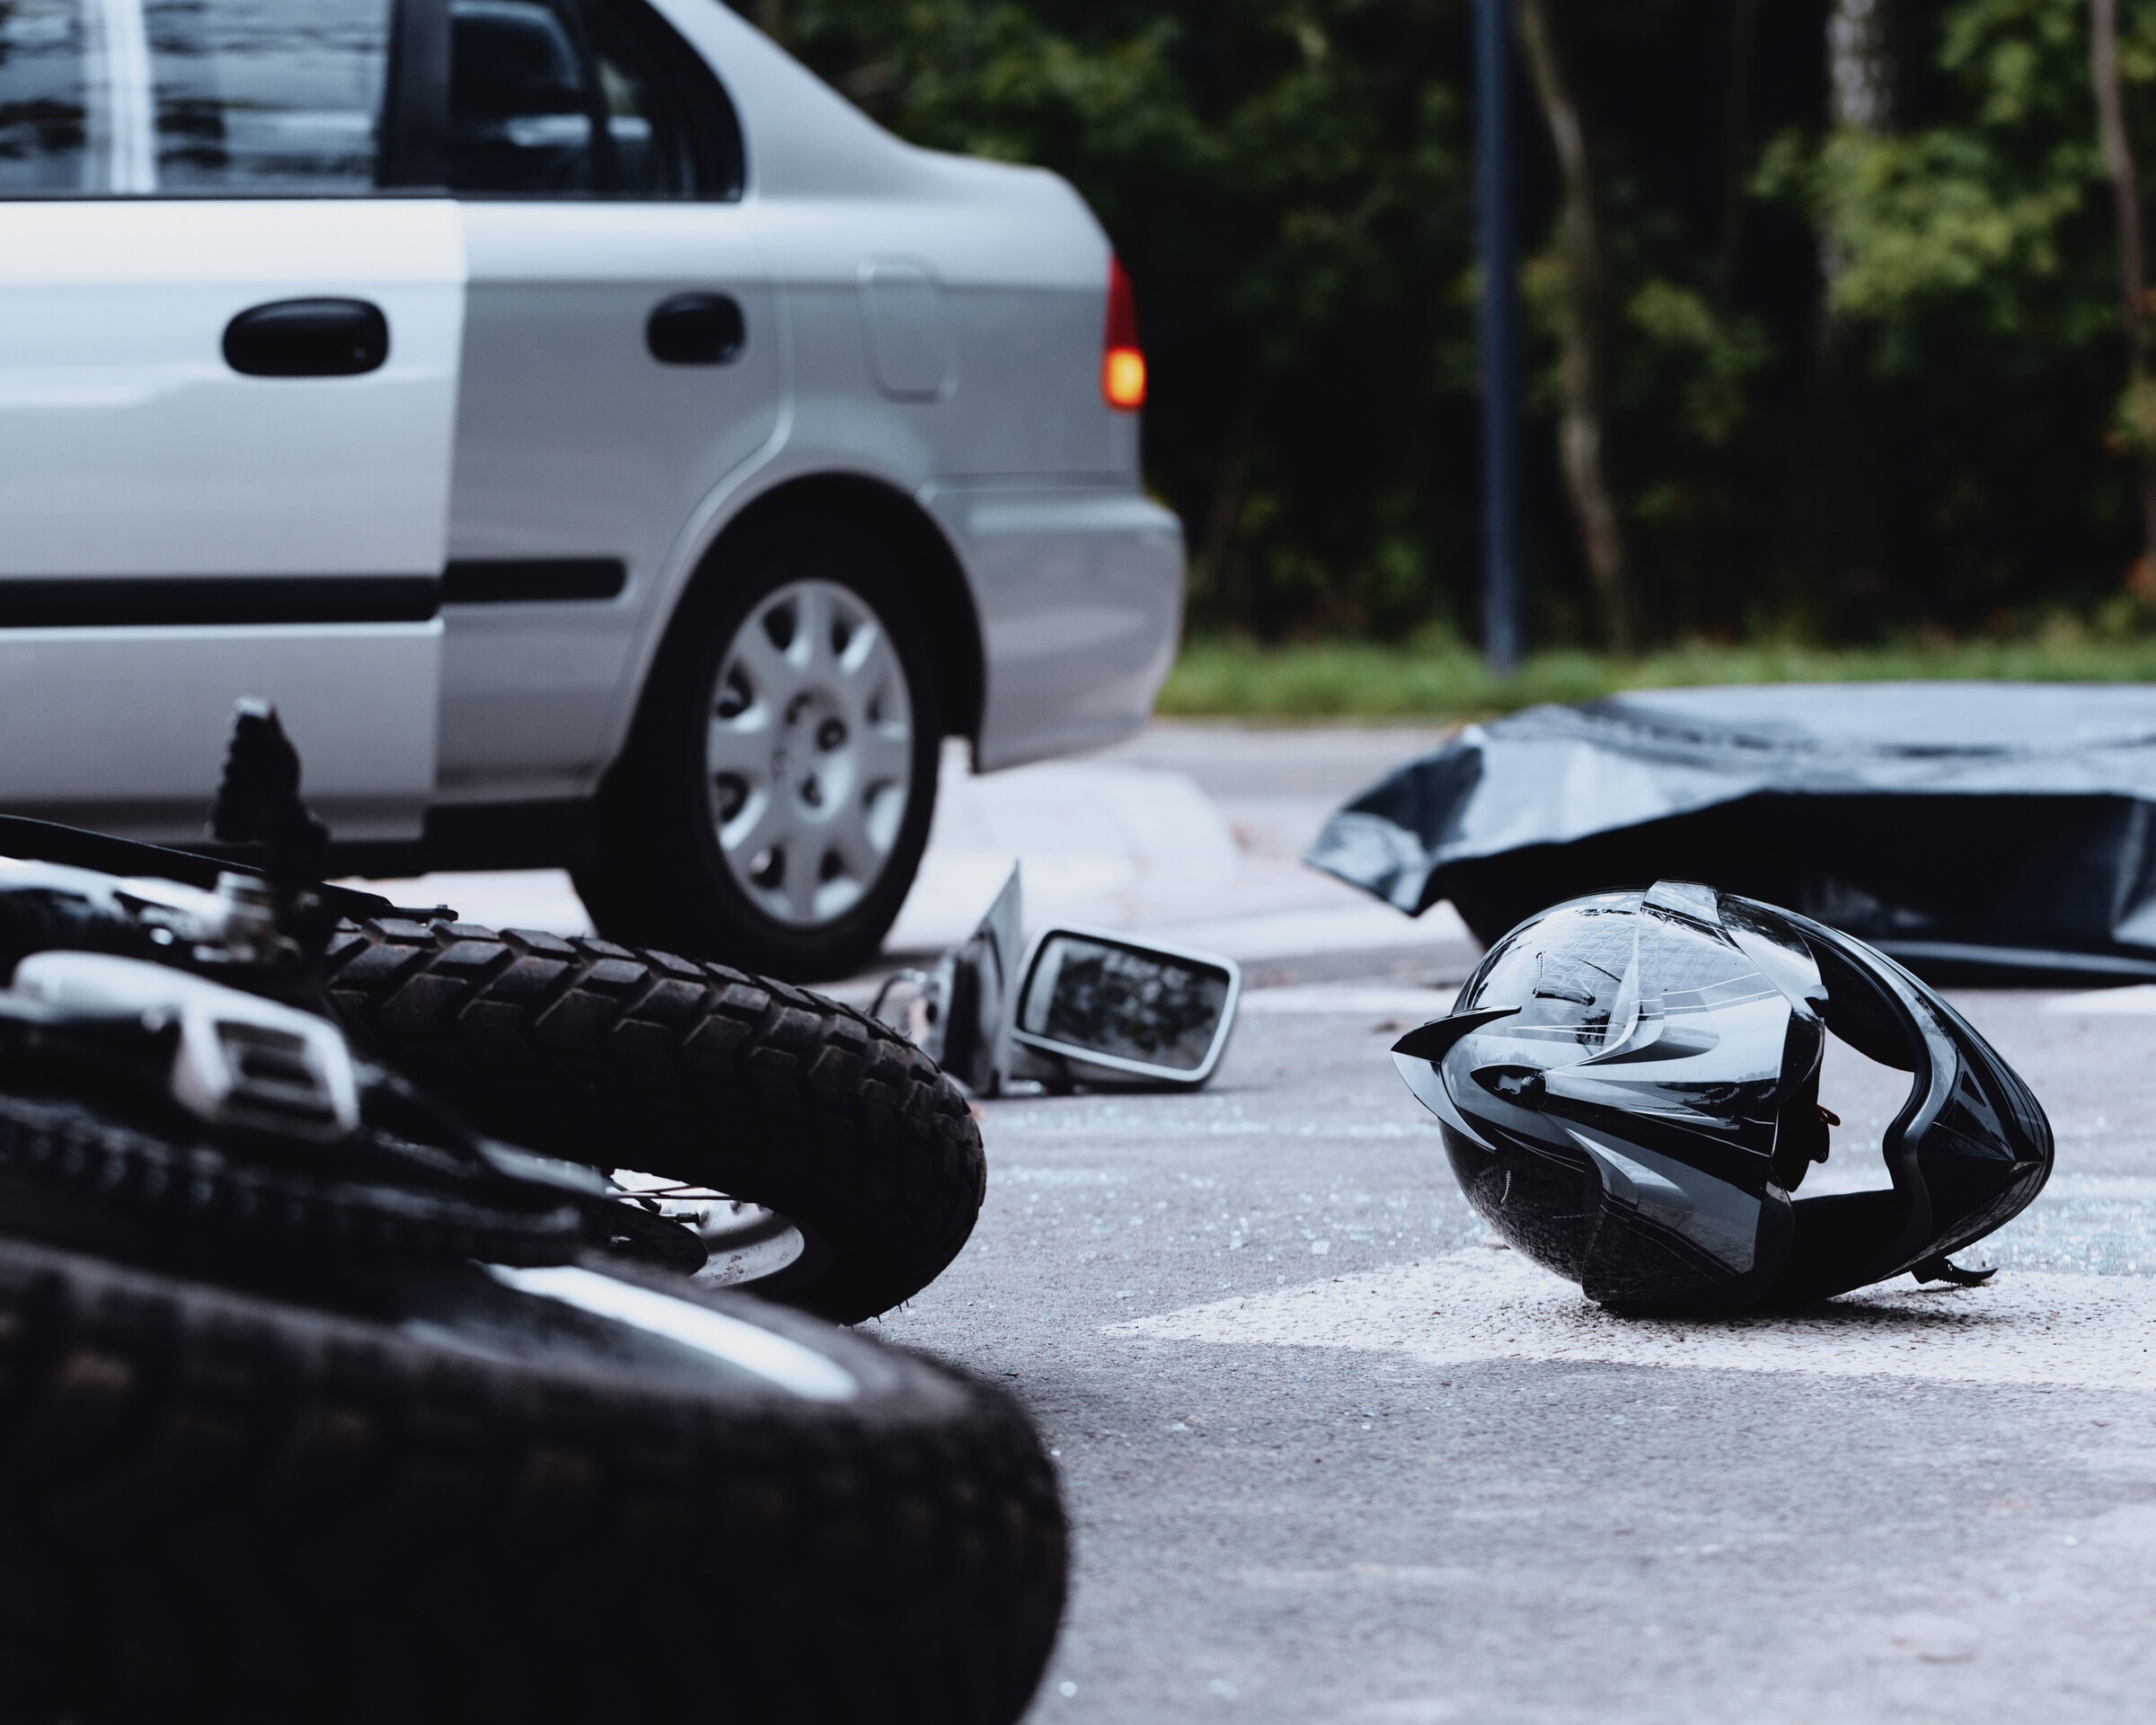 Reliable lawyers who are dedicated to providing support and guidance to those affected by car and motor vehicle accidents in Brooklyn